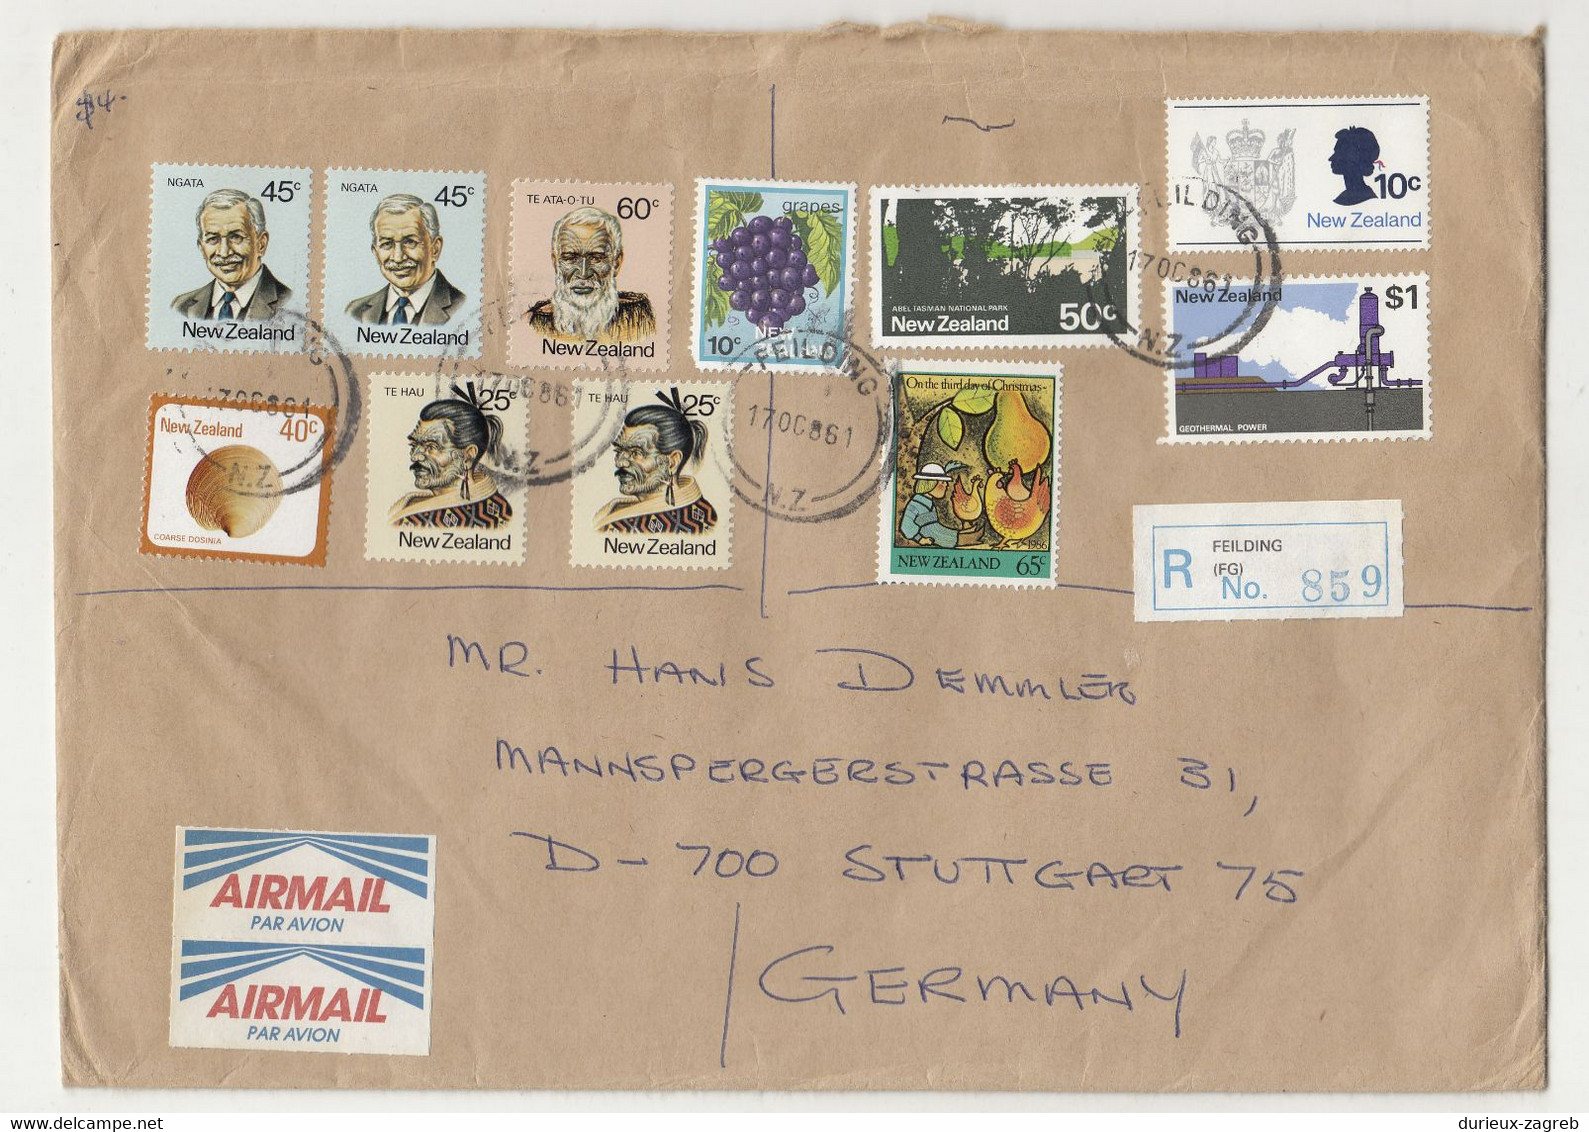 New Zealand Multifranked Large Format Letter Cover Posted Registered Air Mail 1986 Fielding To Germany B230301 - Briefe U. Dokumente